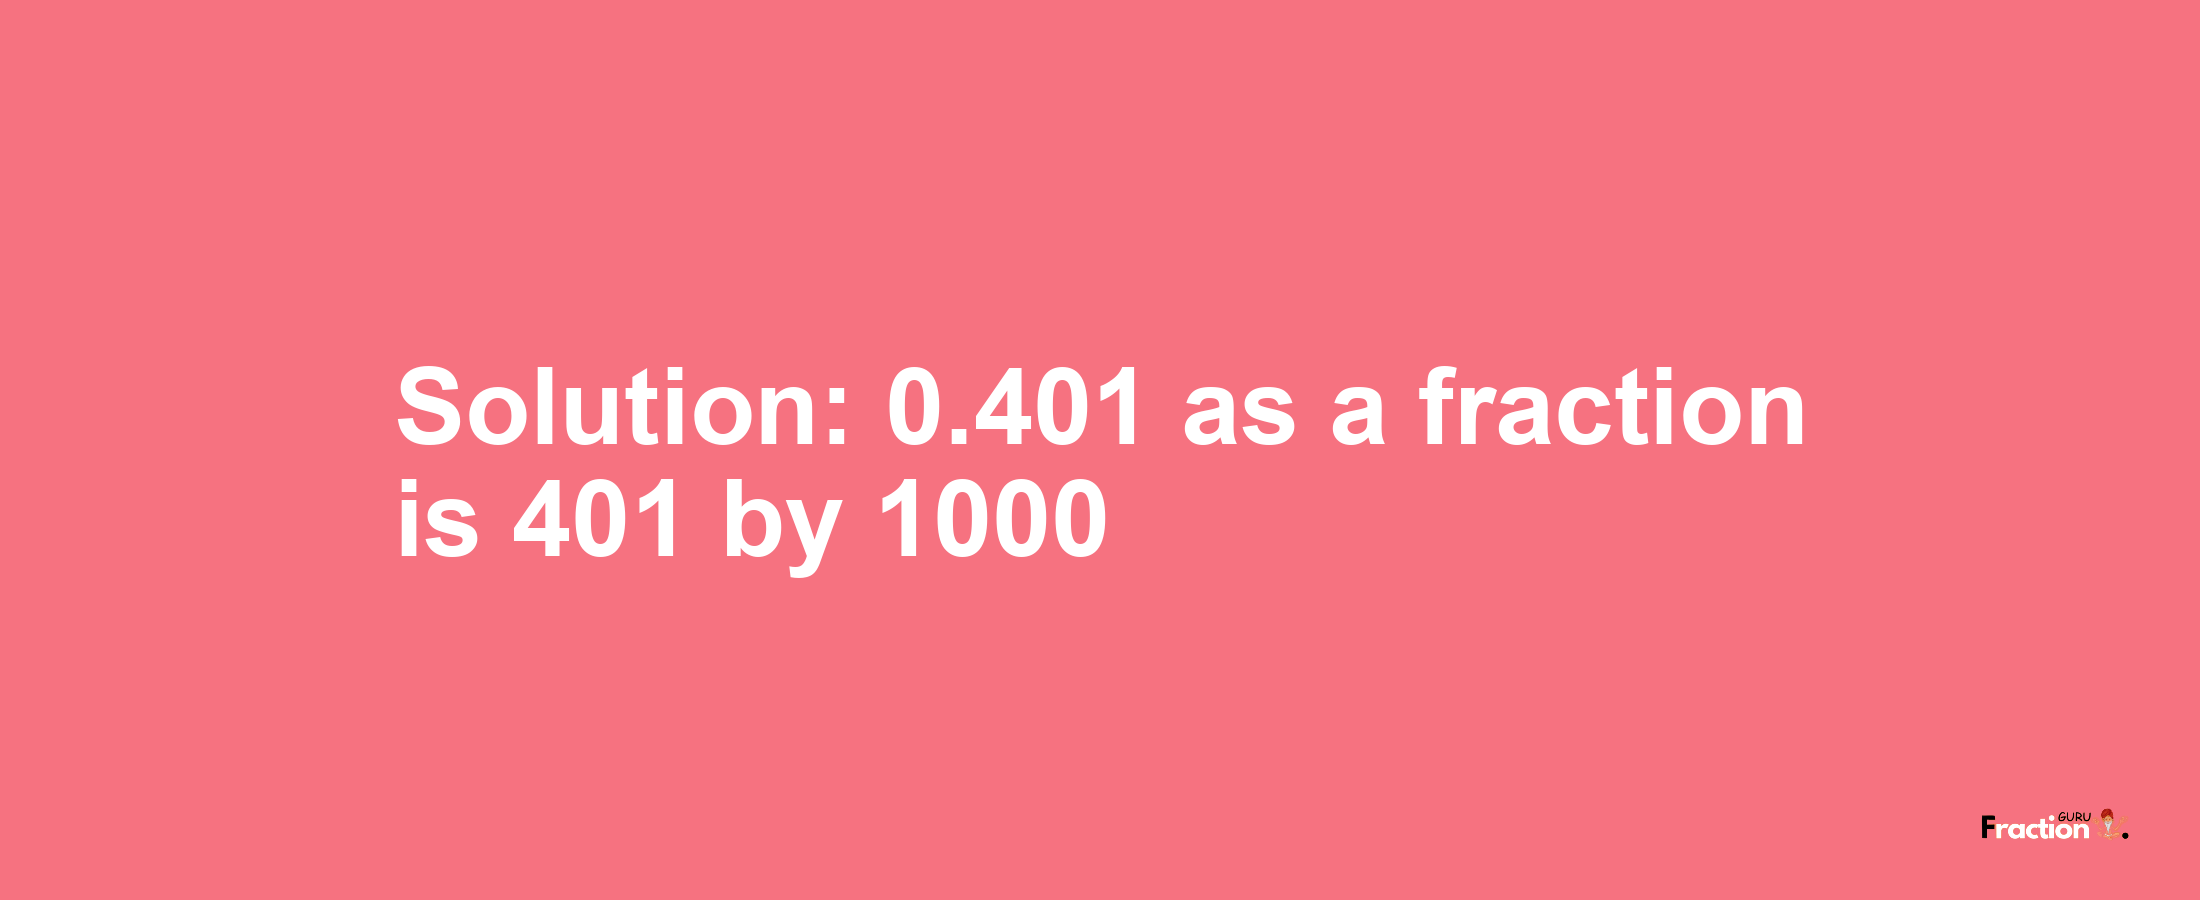 Solution:0.401 as a fraction is 401/1000